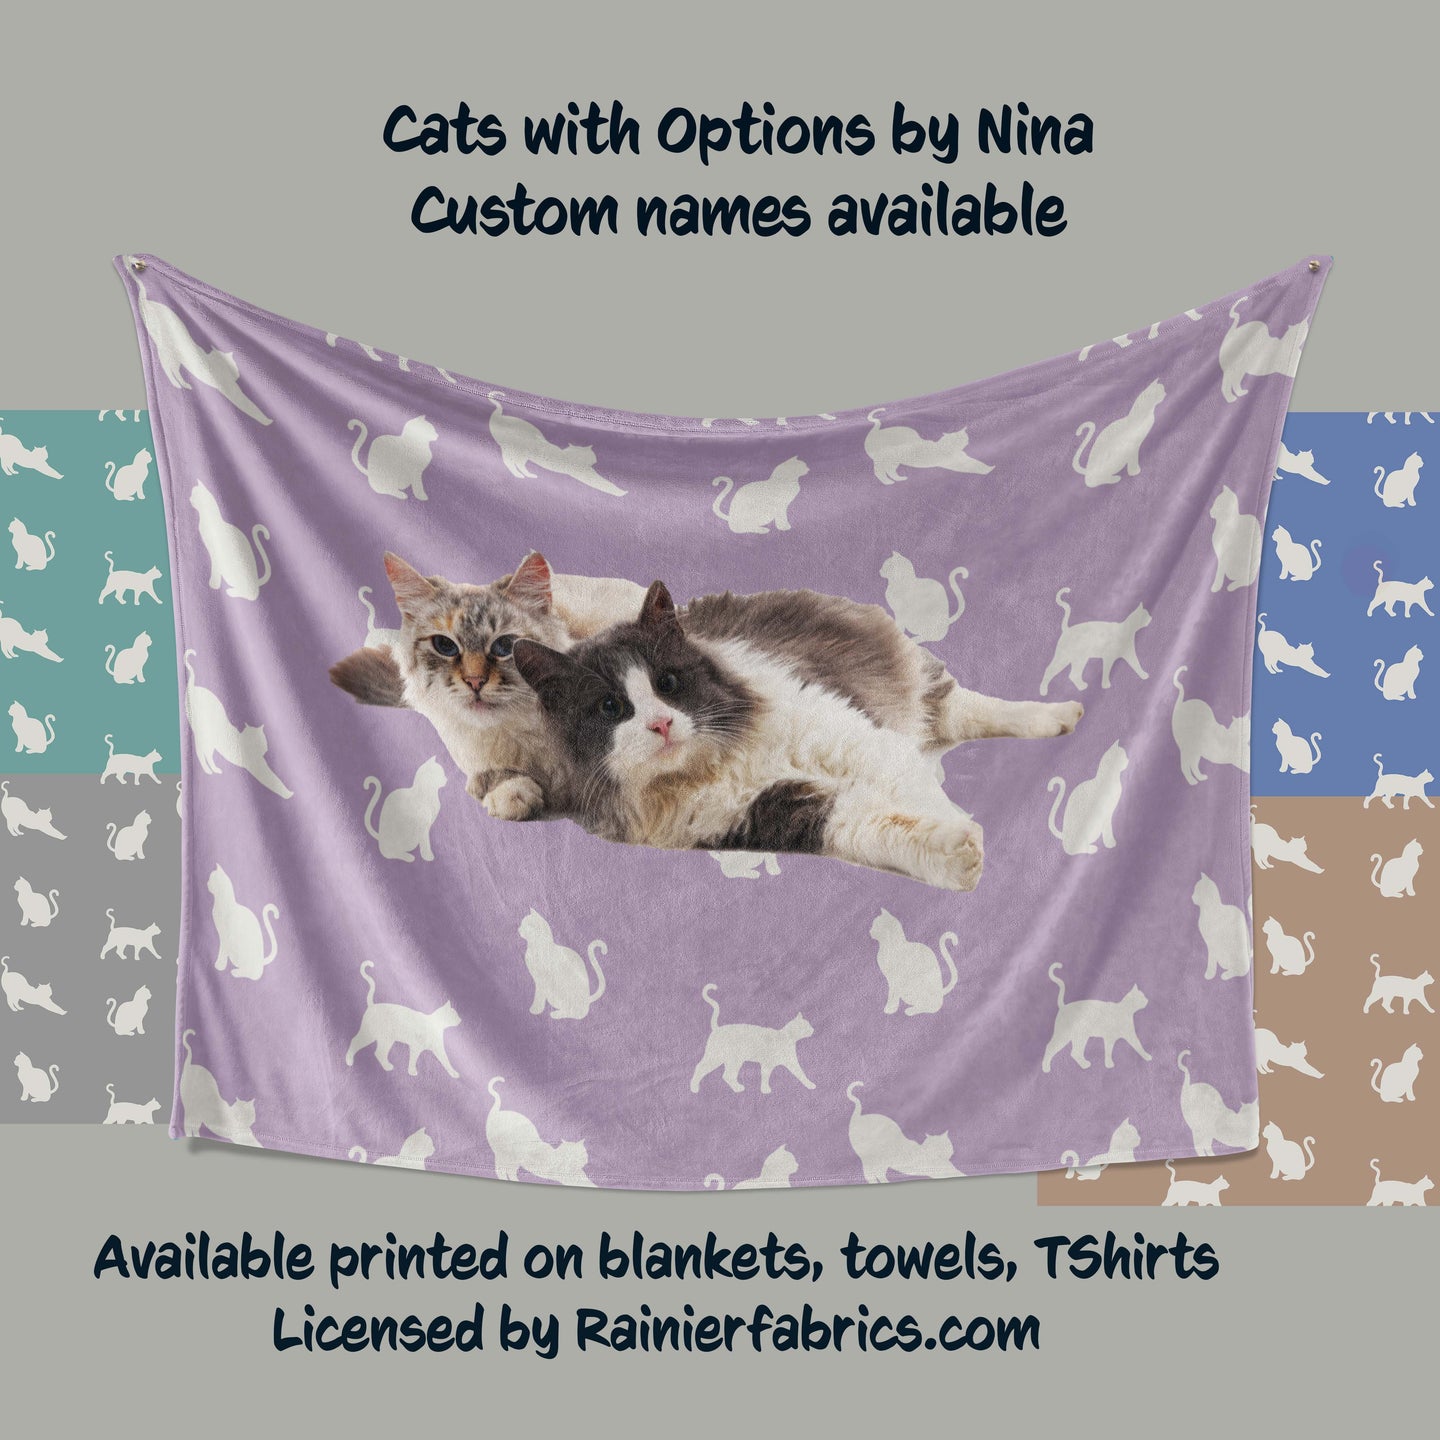 Cats with Options from Nina Blanket